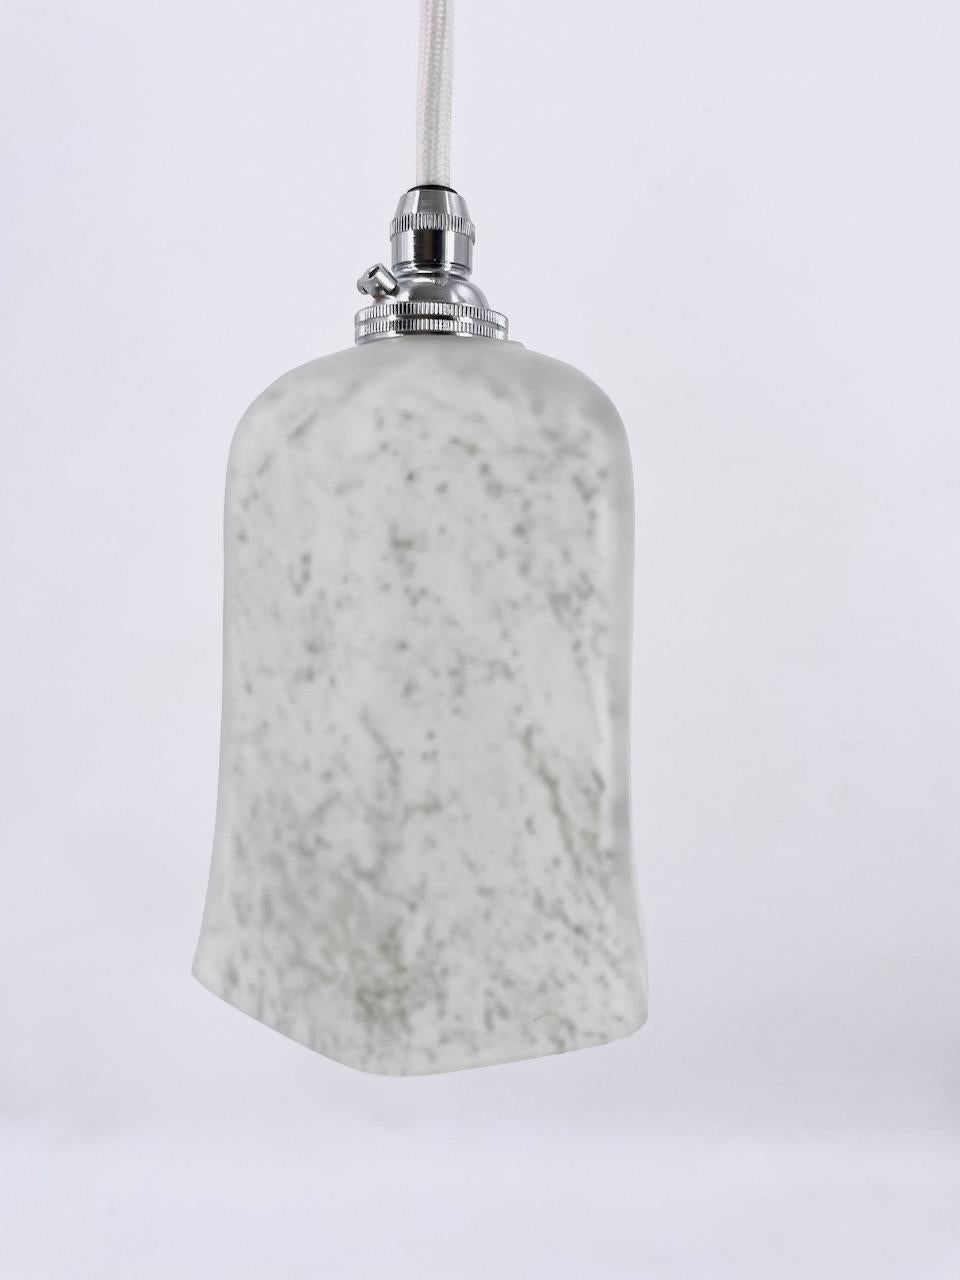 Art Deco Ceiling Lights Circa 1920, White Glass With Veins Like Marble, Series Available For Sale